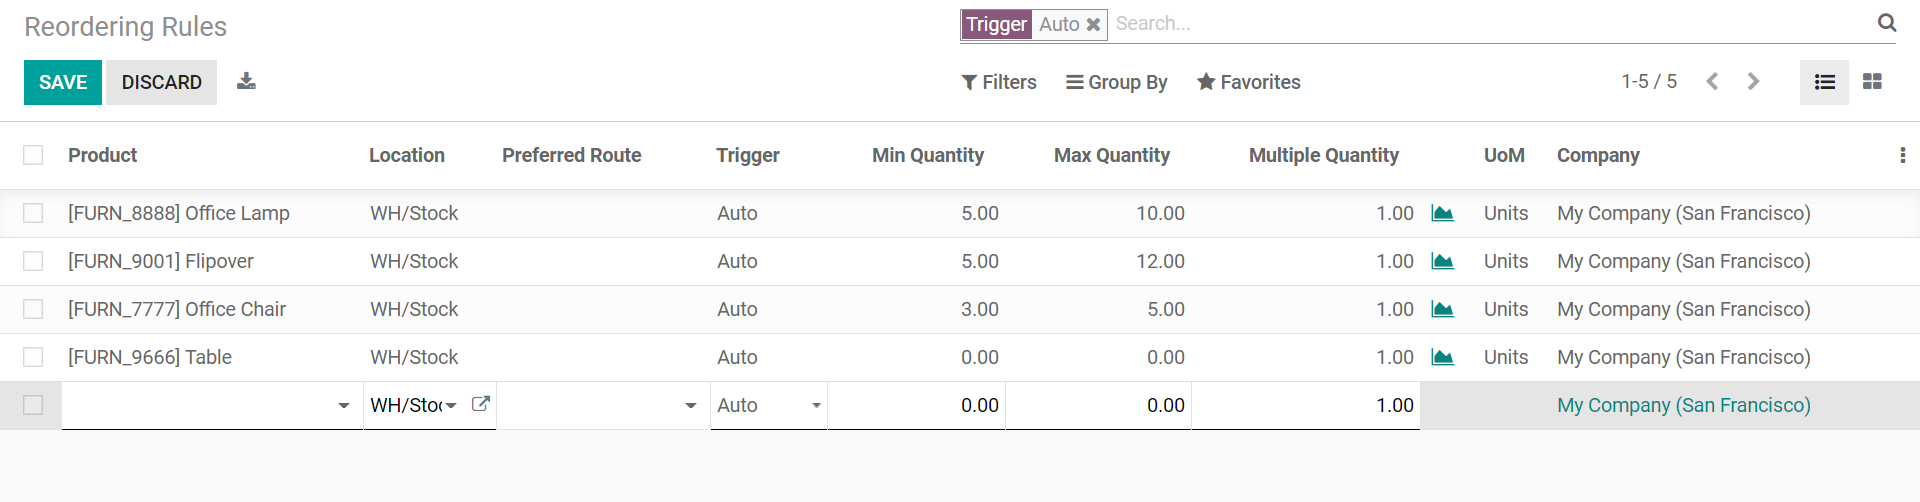 replenish-stock-with-odoo-reordering-rules-cybrosys